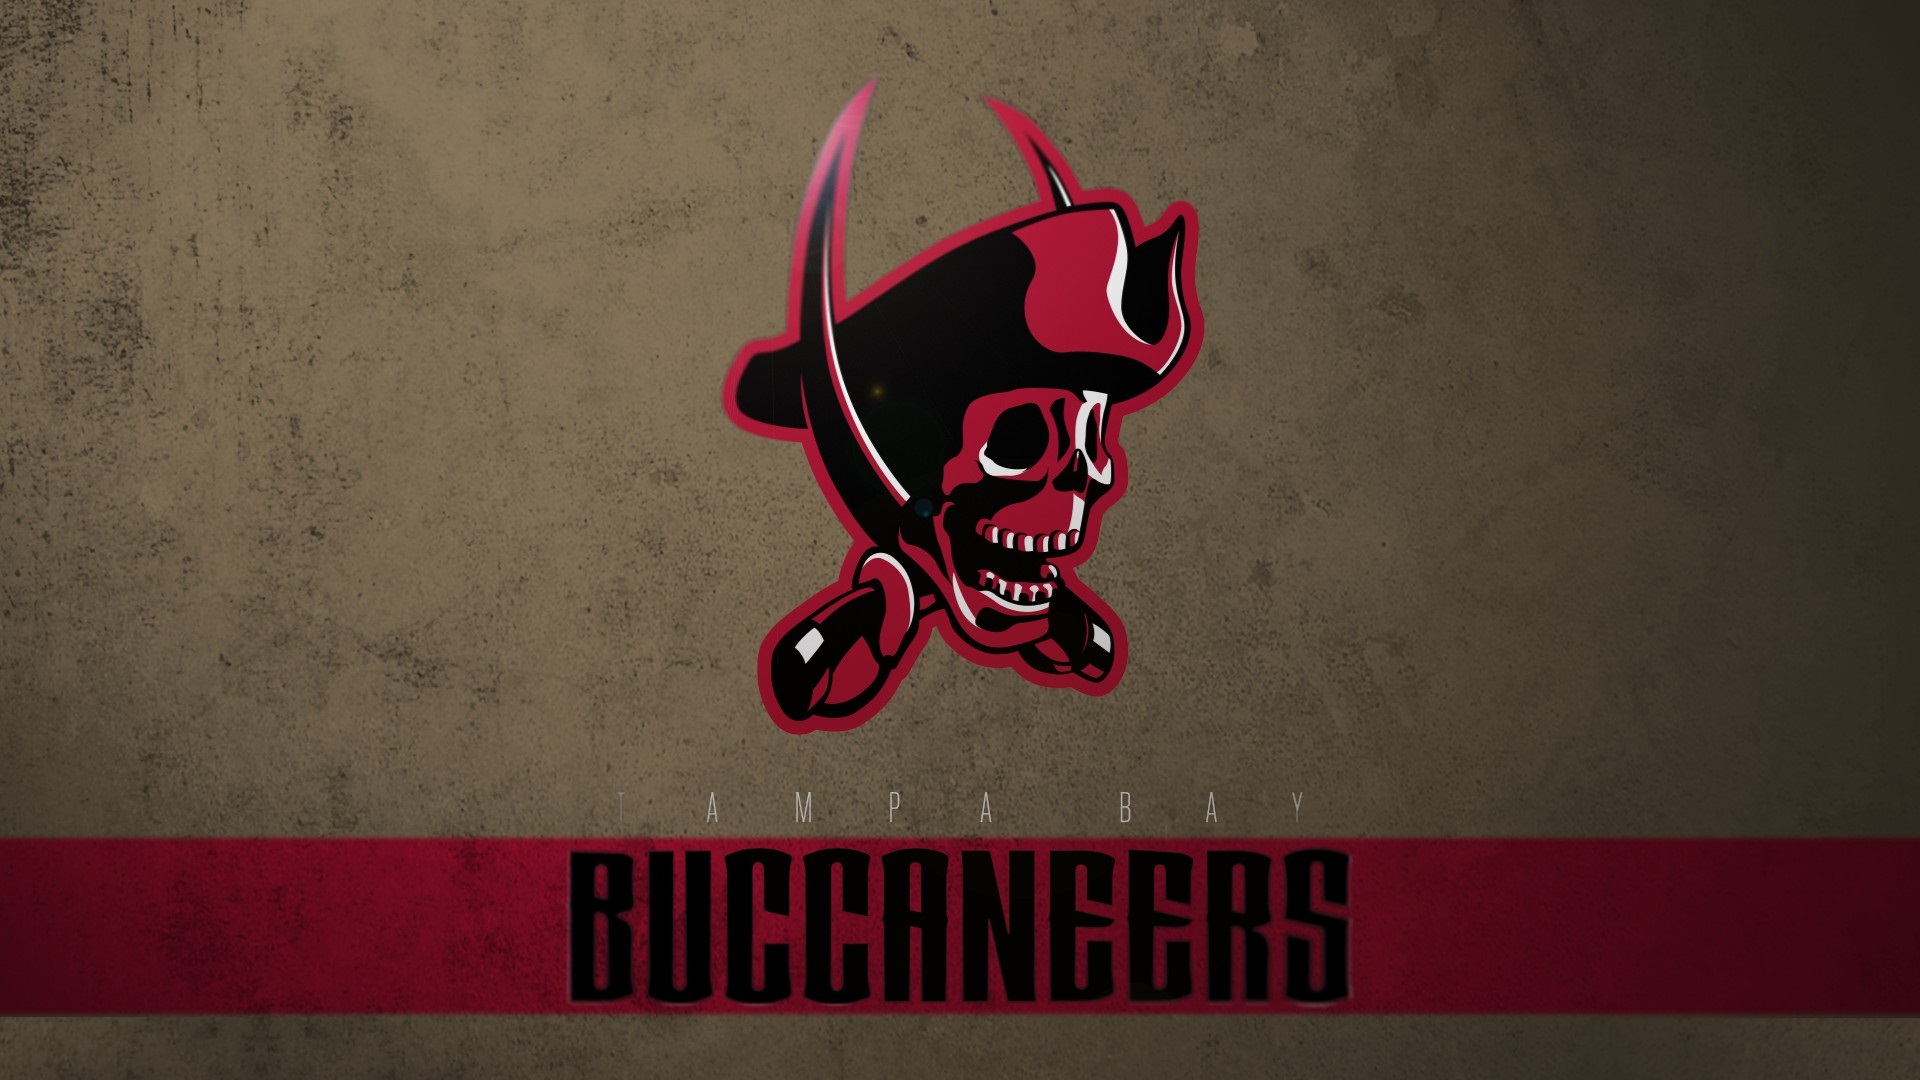 Buccaneers Wallpaper For Mac OS with high-resolution 1920x1080 pixel. Download and set as wallpaper for Desktop Computer, Apple iPhone X, XS Max, XR, 8, 7, 6, SE, iPad, Android